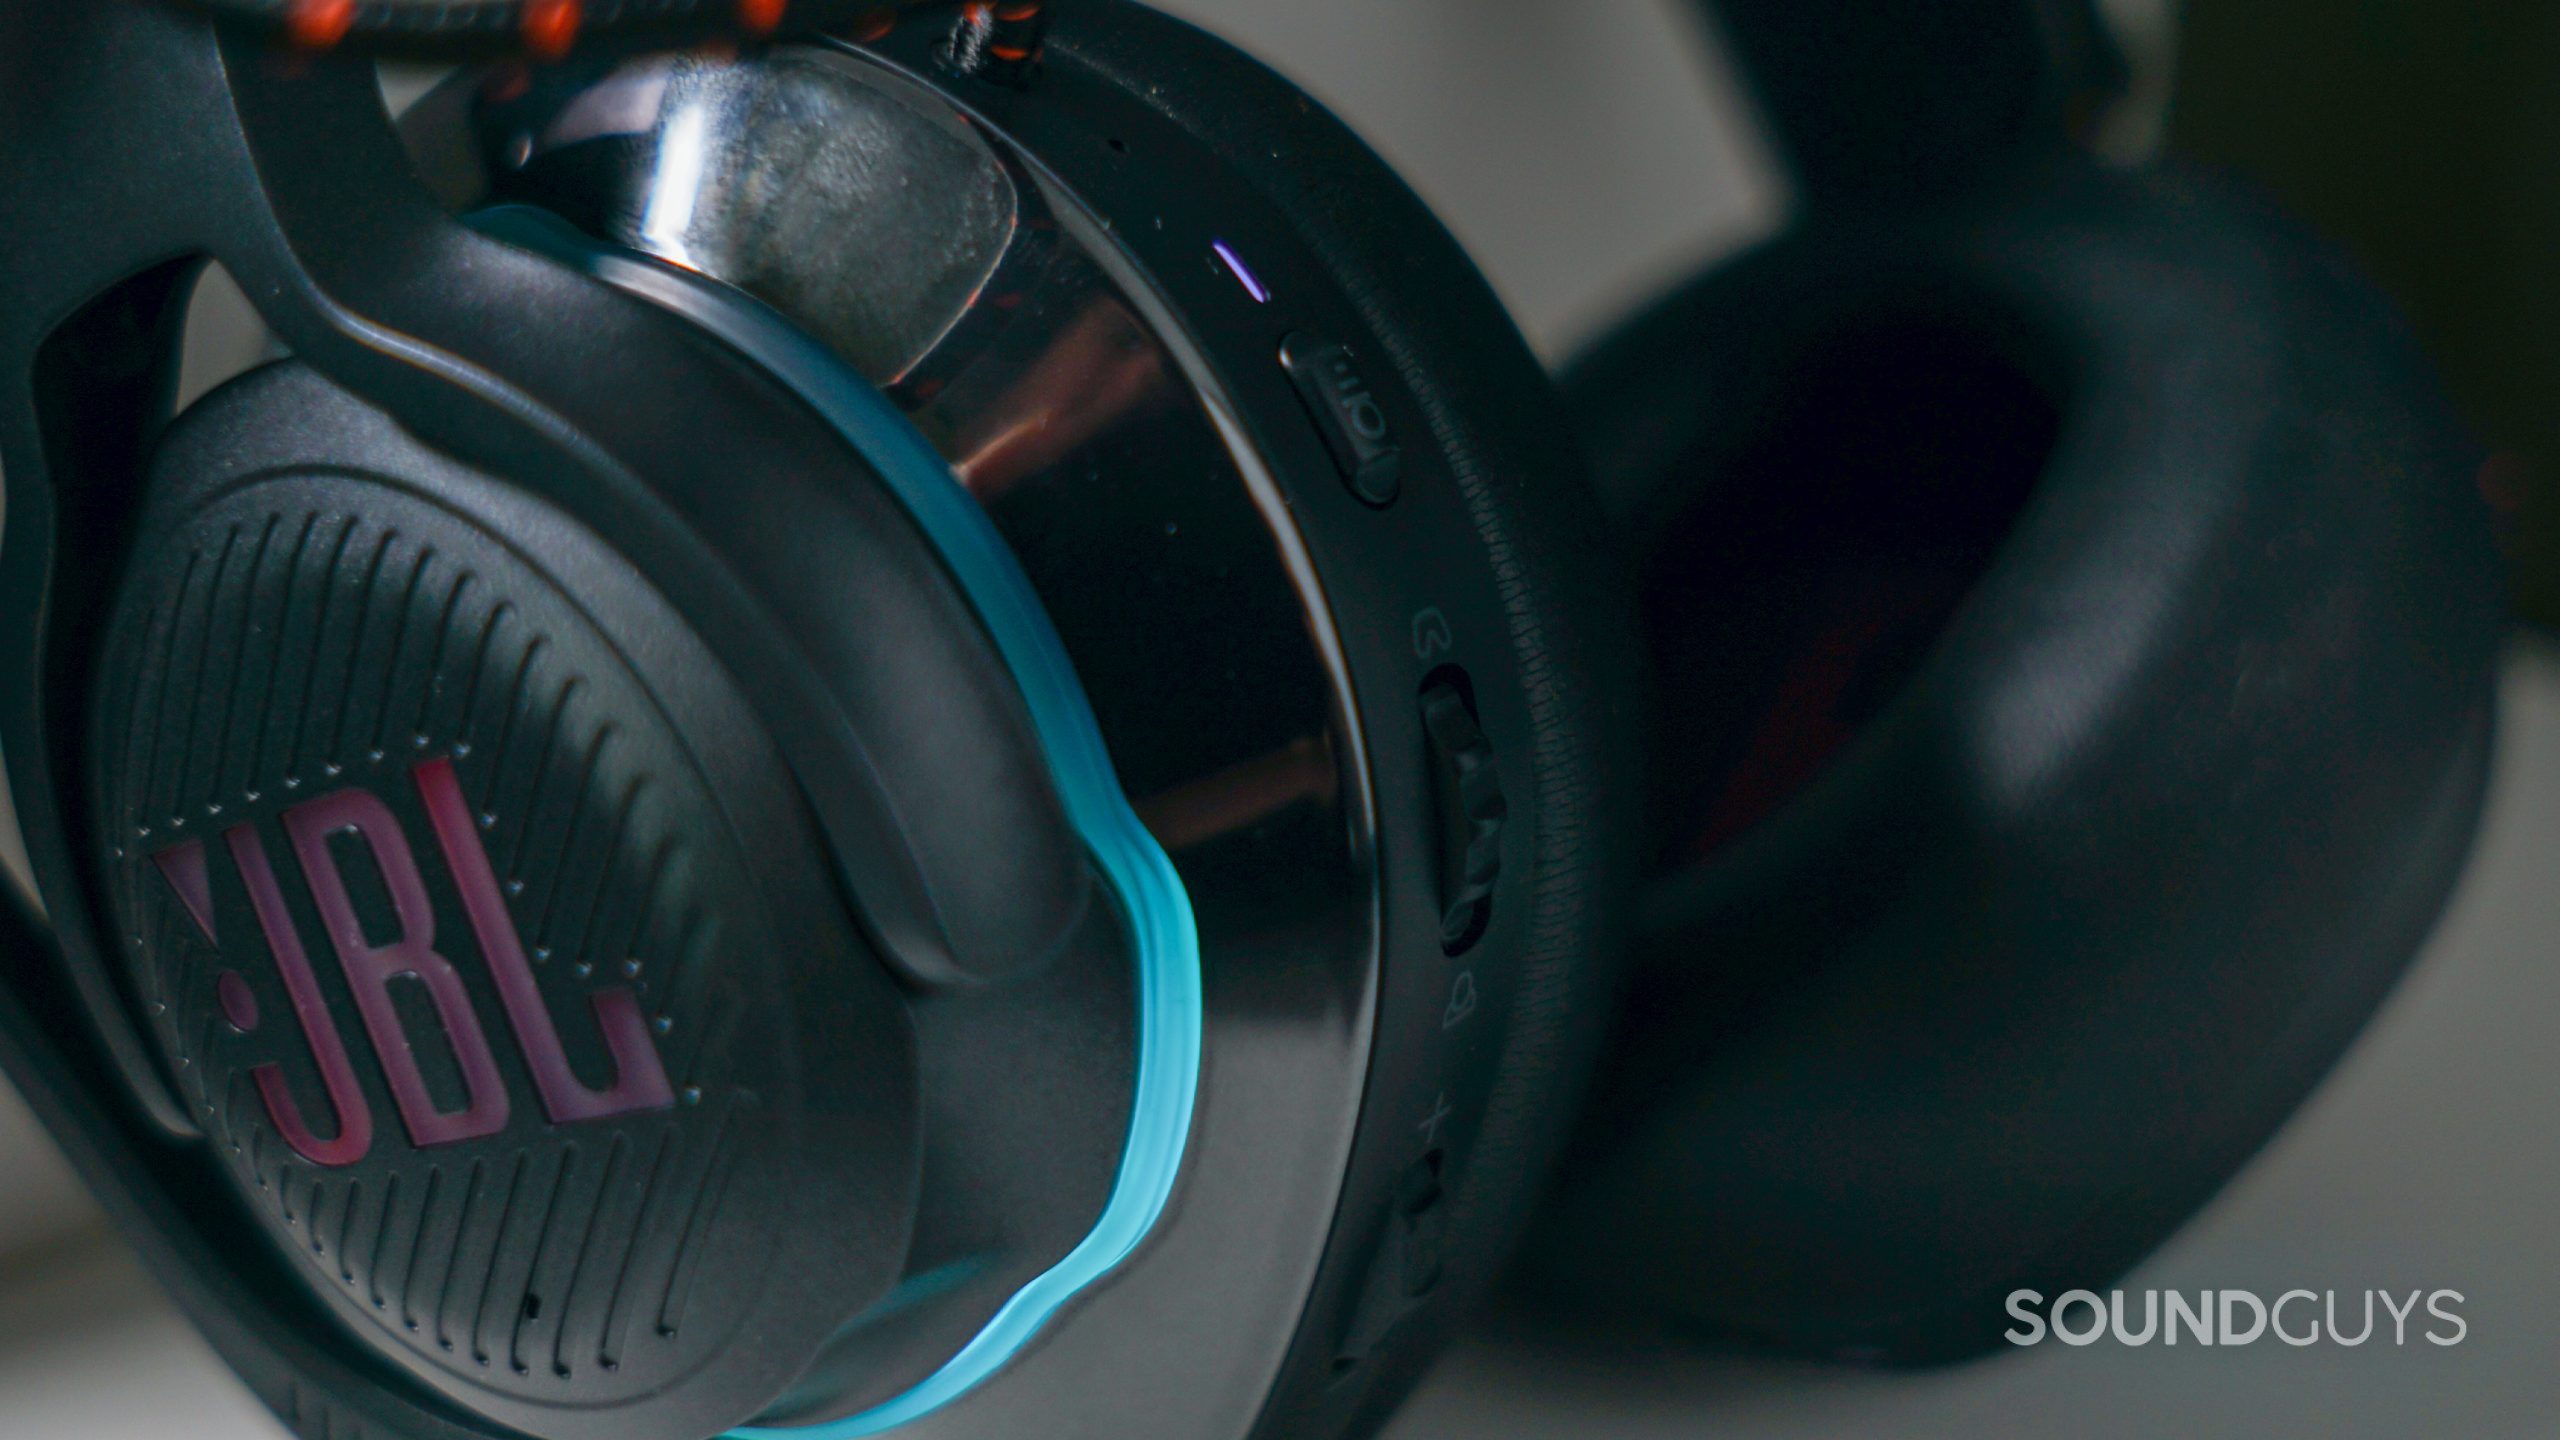 A close up shot of the JBL Quantum 800 gaming headset, showing the JBL logo and side controls.